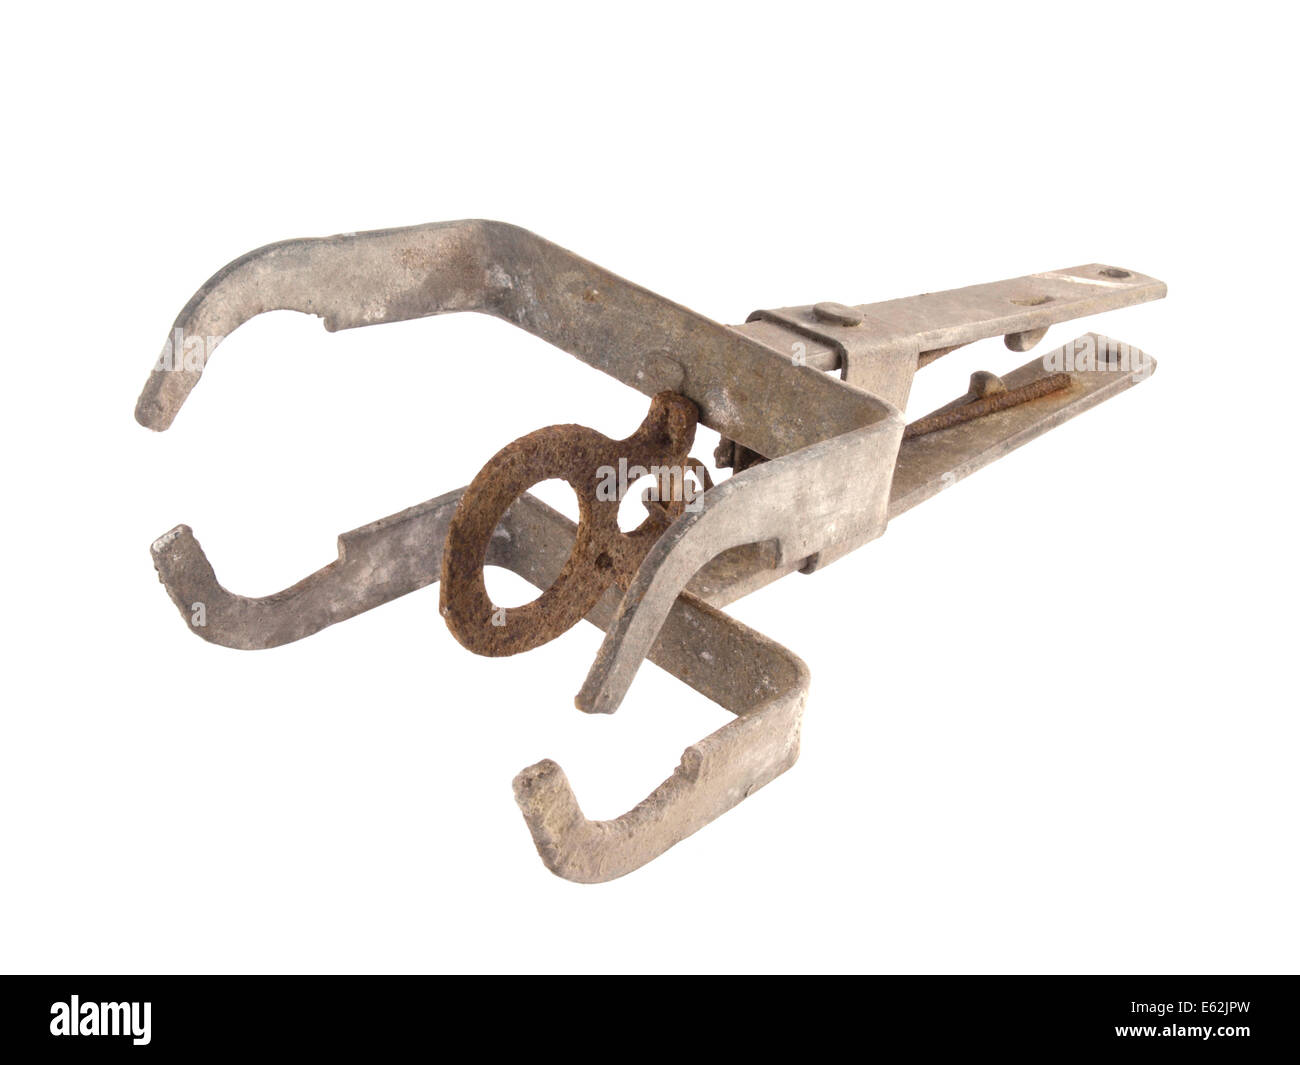 Close up photo of a mole trap on a white background. Stock Photo